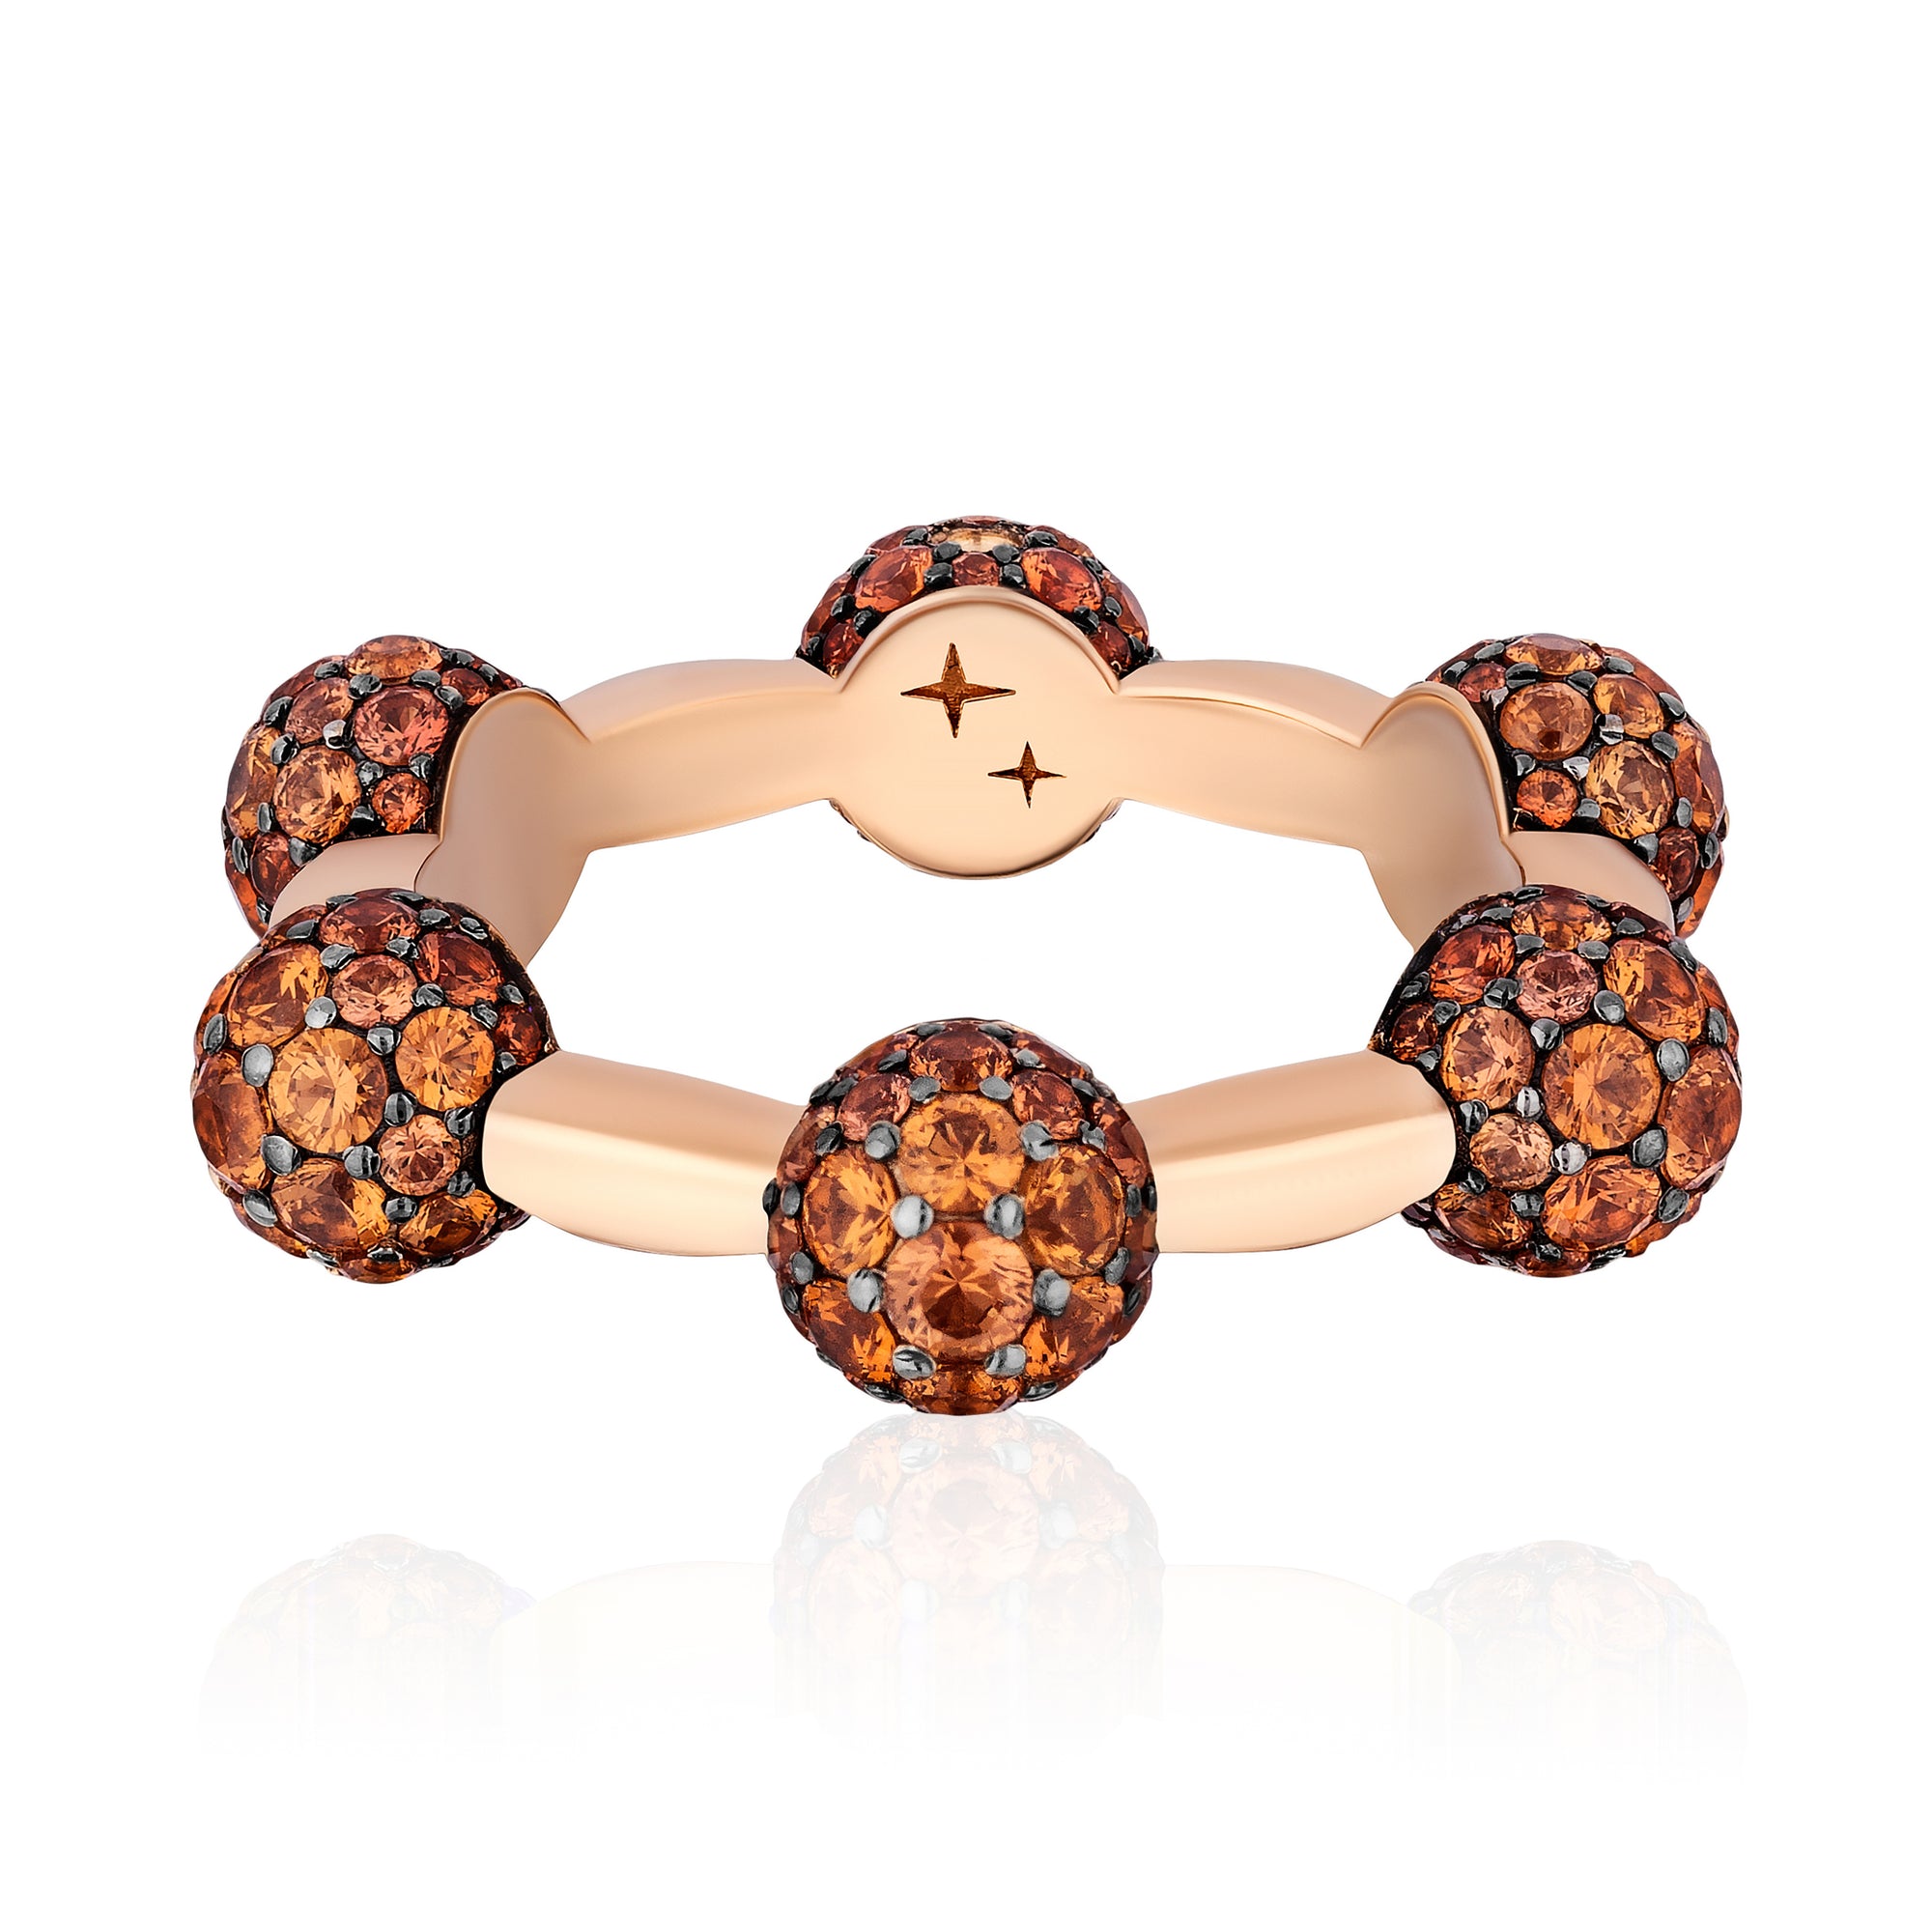 Celestial Ring in Rose Gold with Orange Sapphires